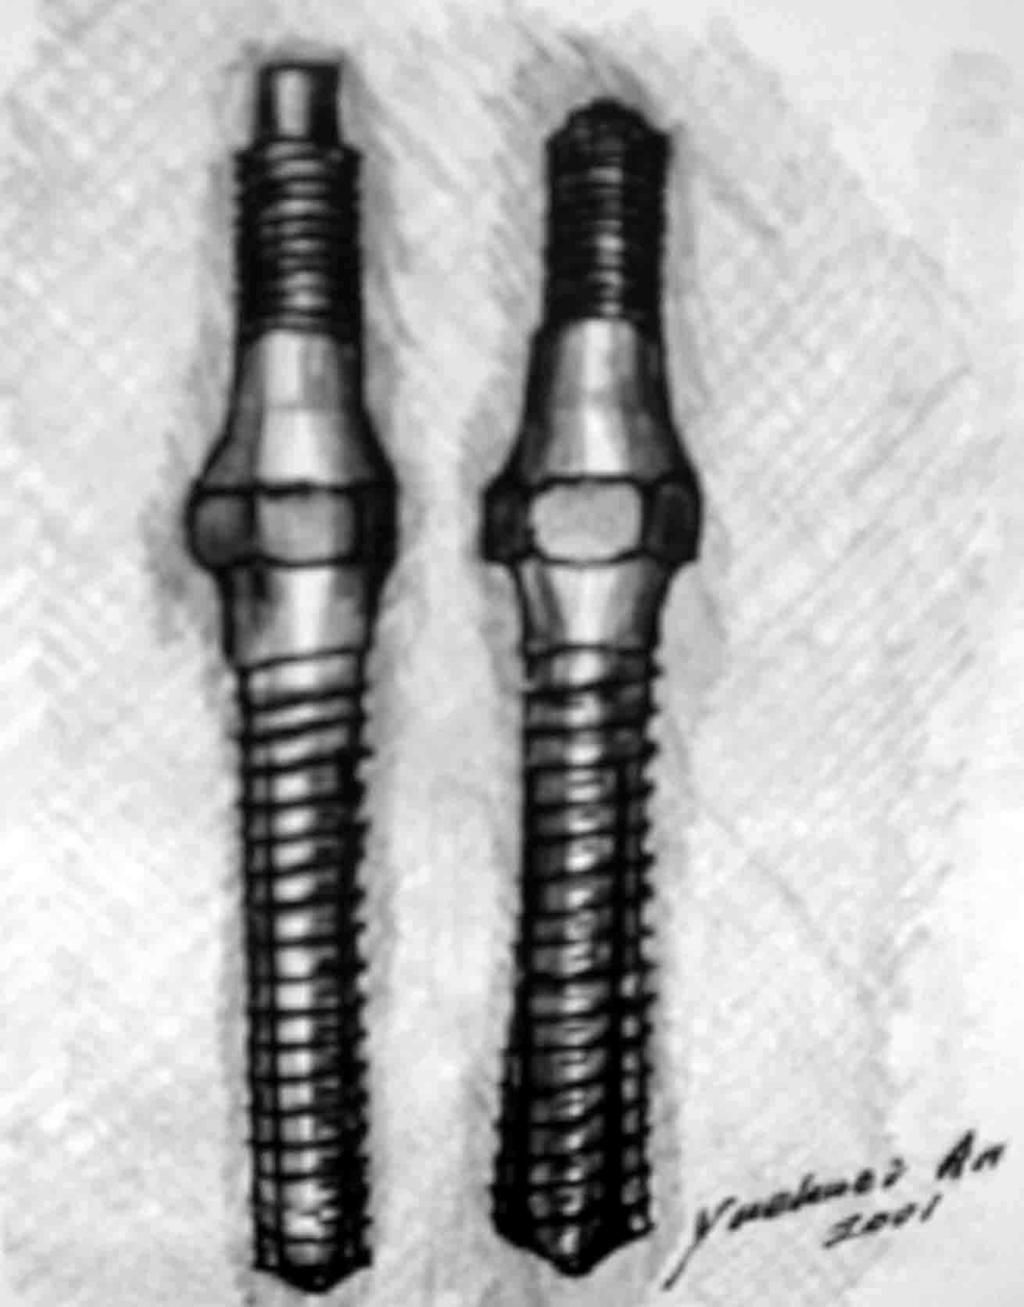 MODIFIED IMPLANTS EXPANDABLE SCREWS Cylinder inserted into screw shaft which then expands 50% greater holding